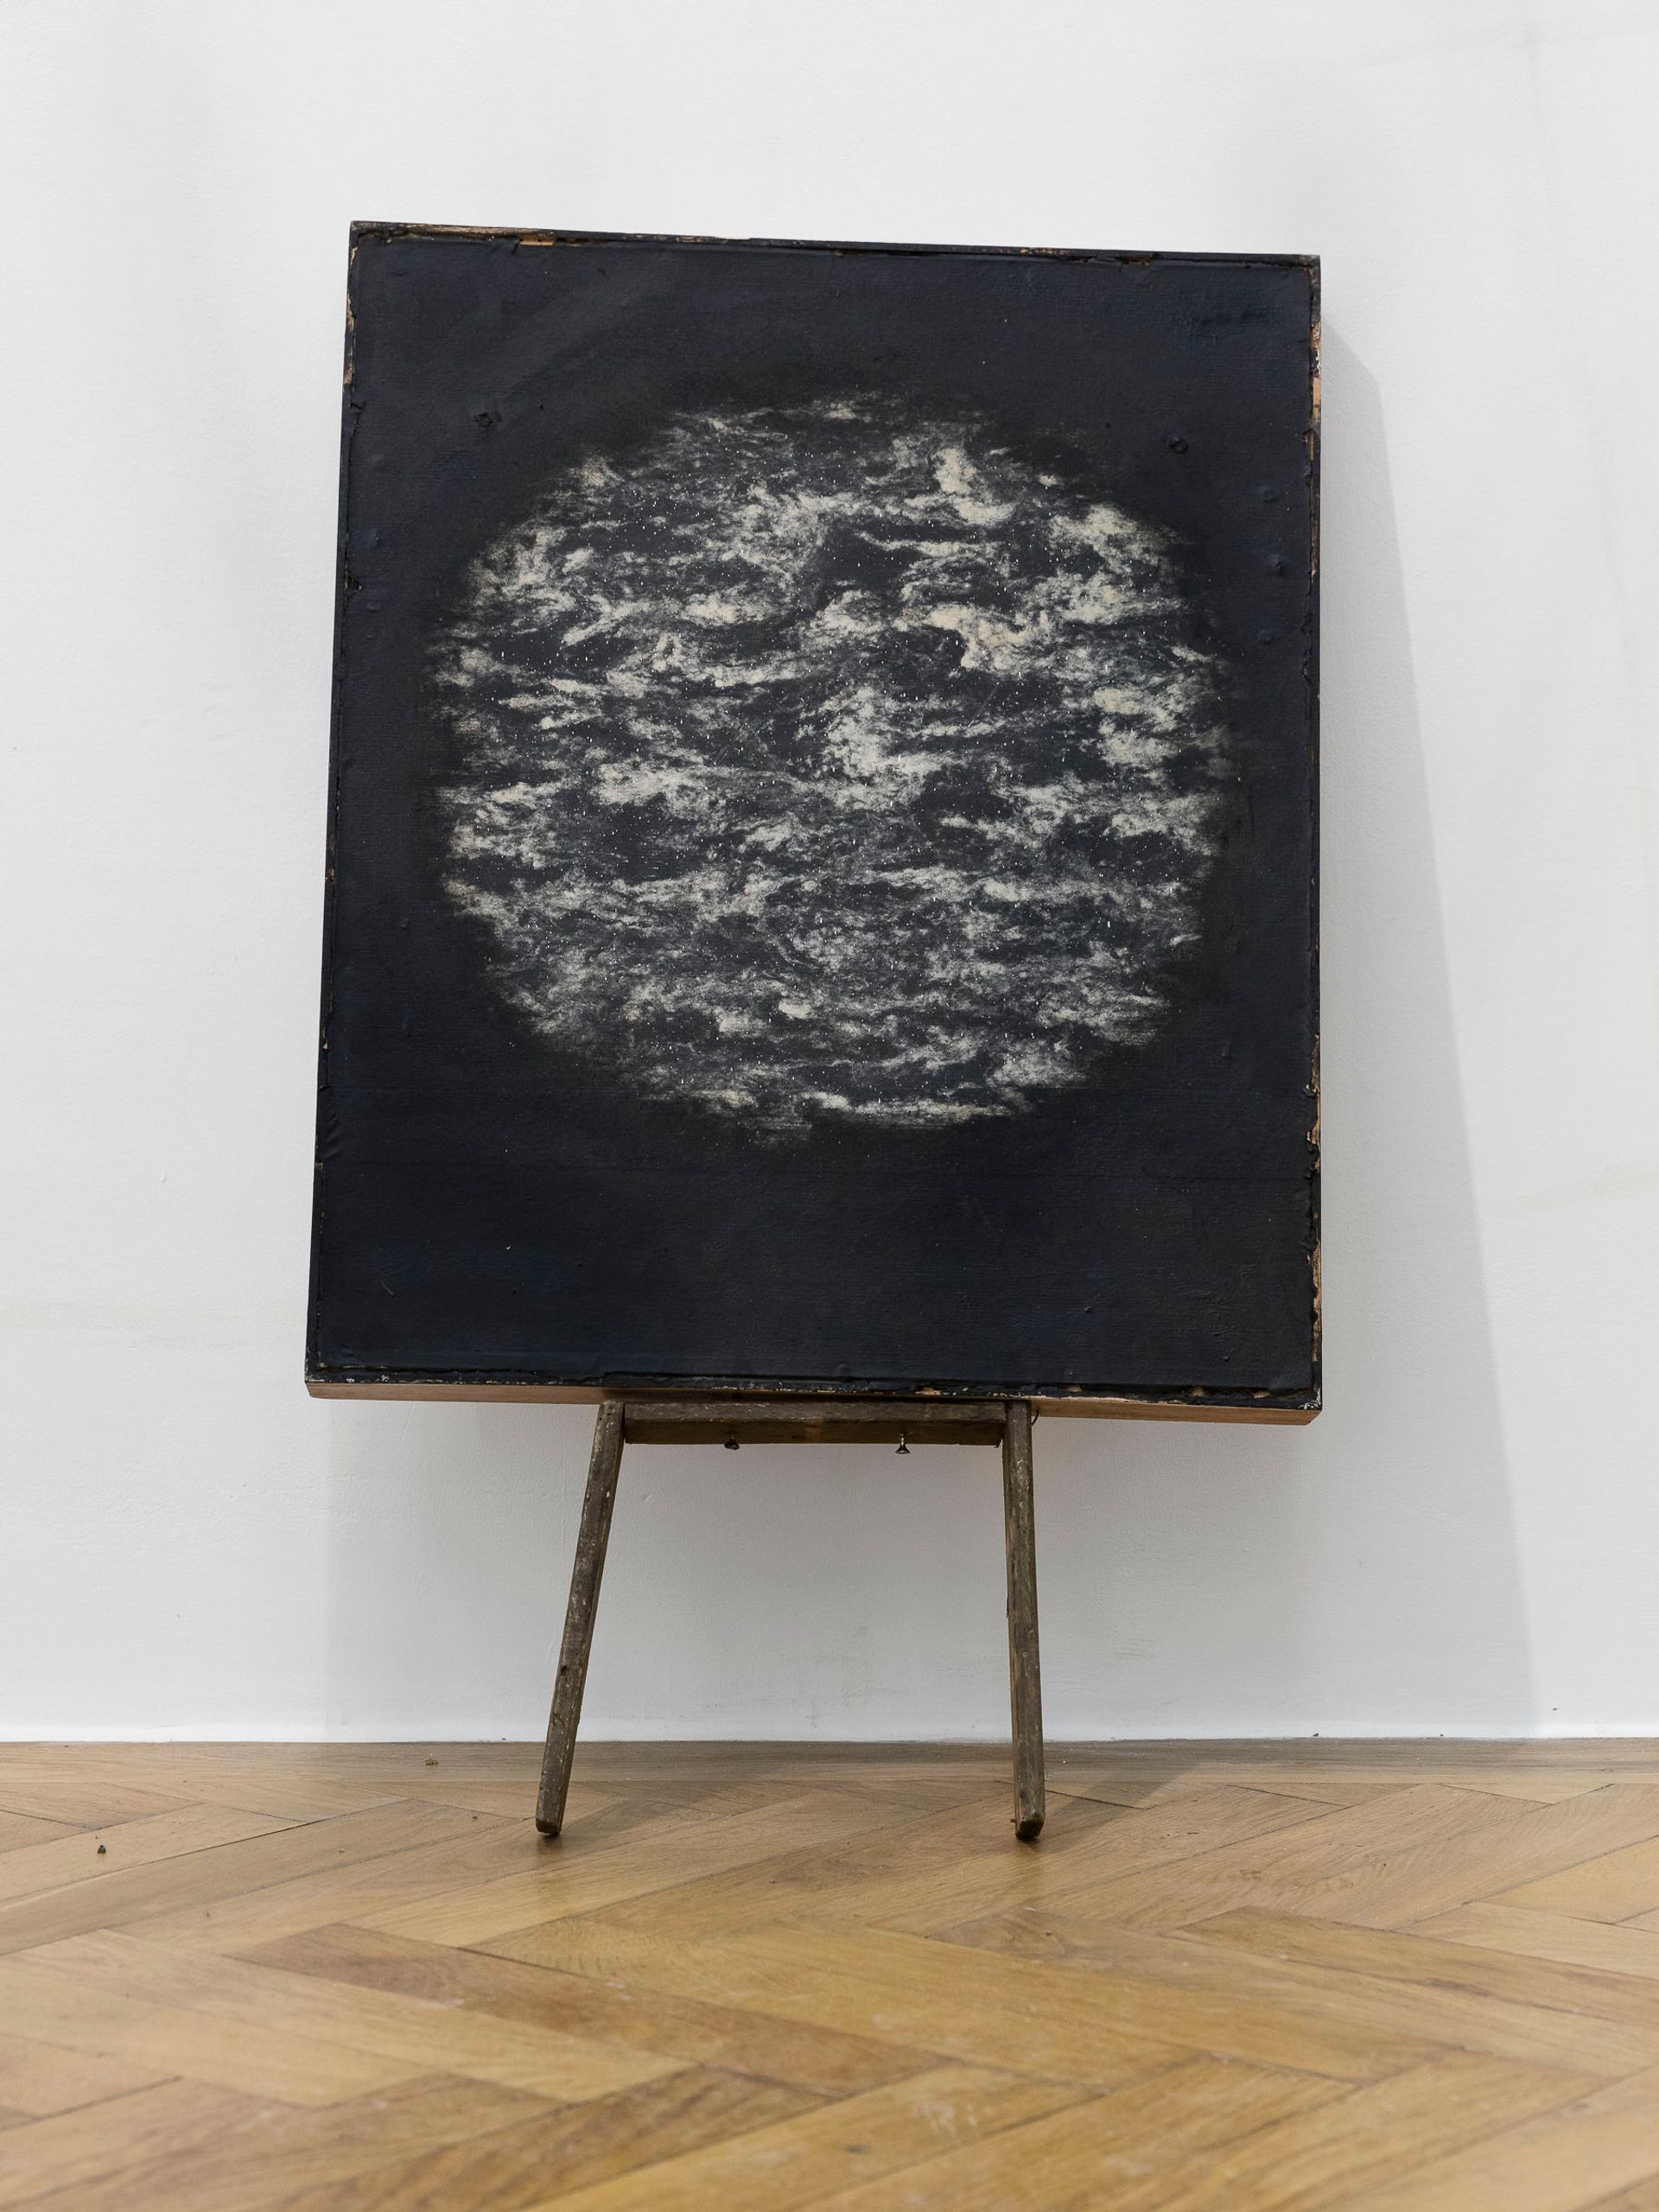 Anna McCarthy, D-I-A-L A M-O-O-N, 2018, mixed media, dimensions variable